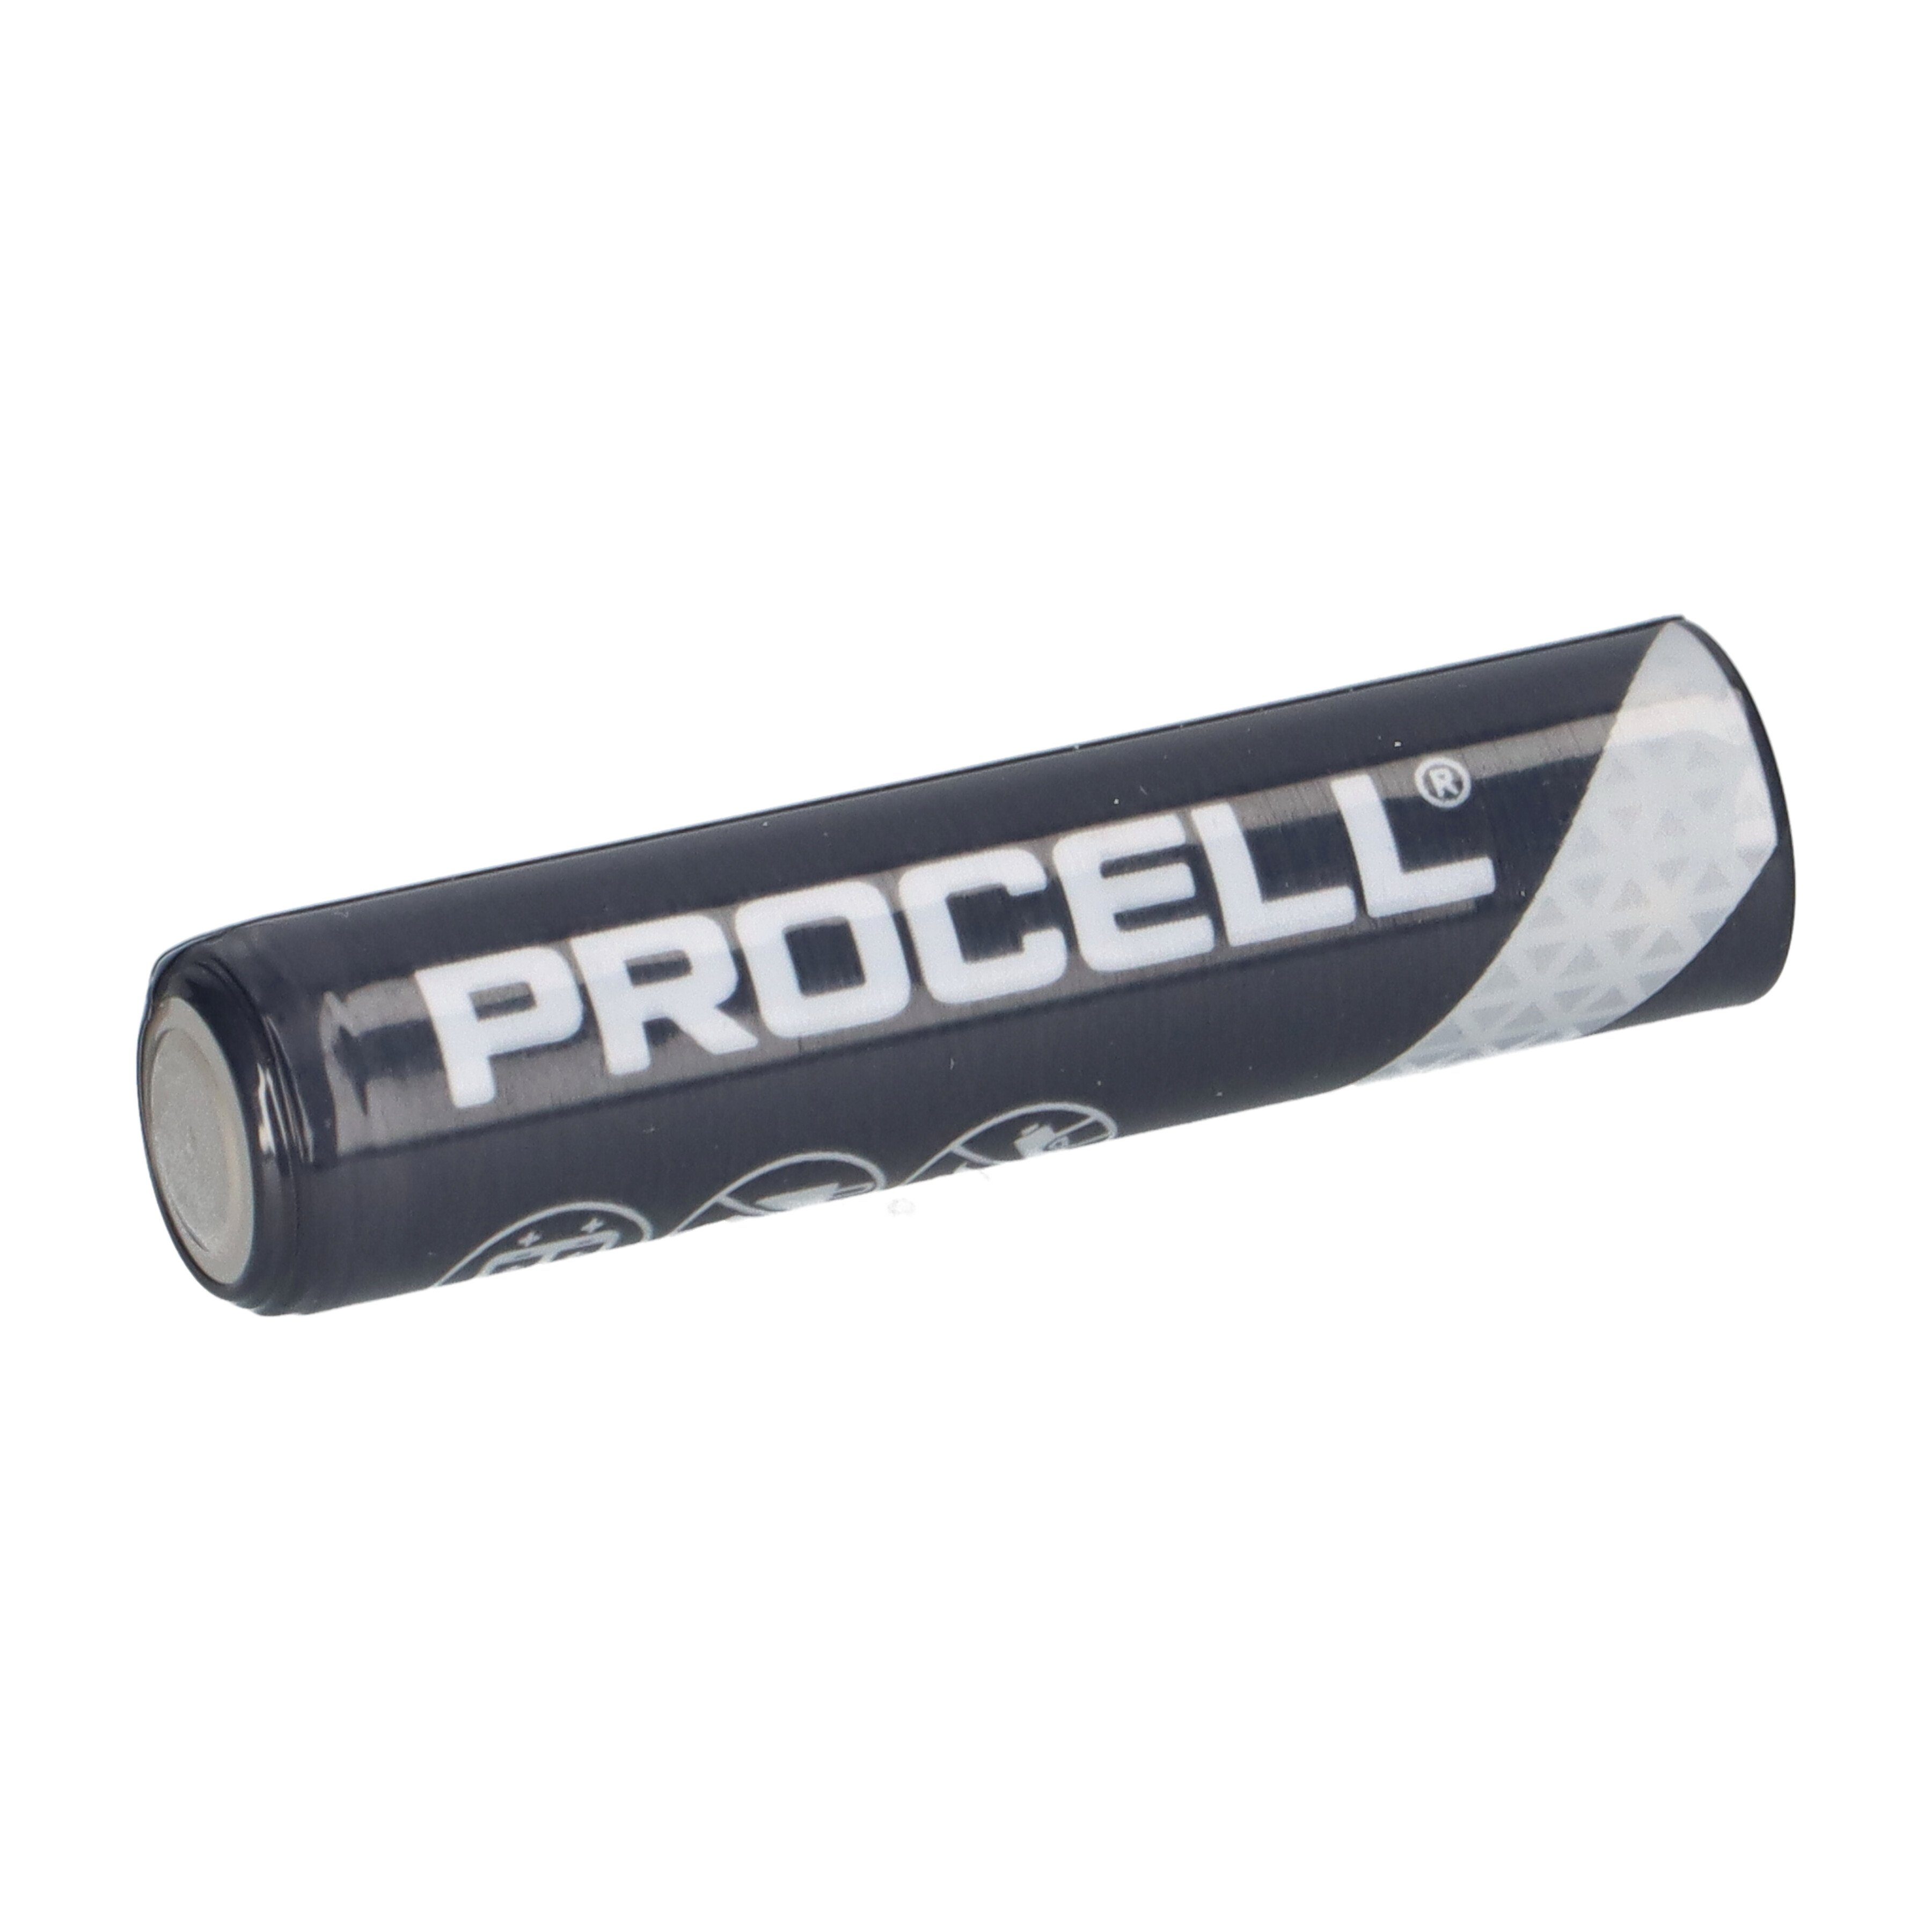 Duracell Micro Batterie Batterie Procell 200x AAA MN2400